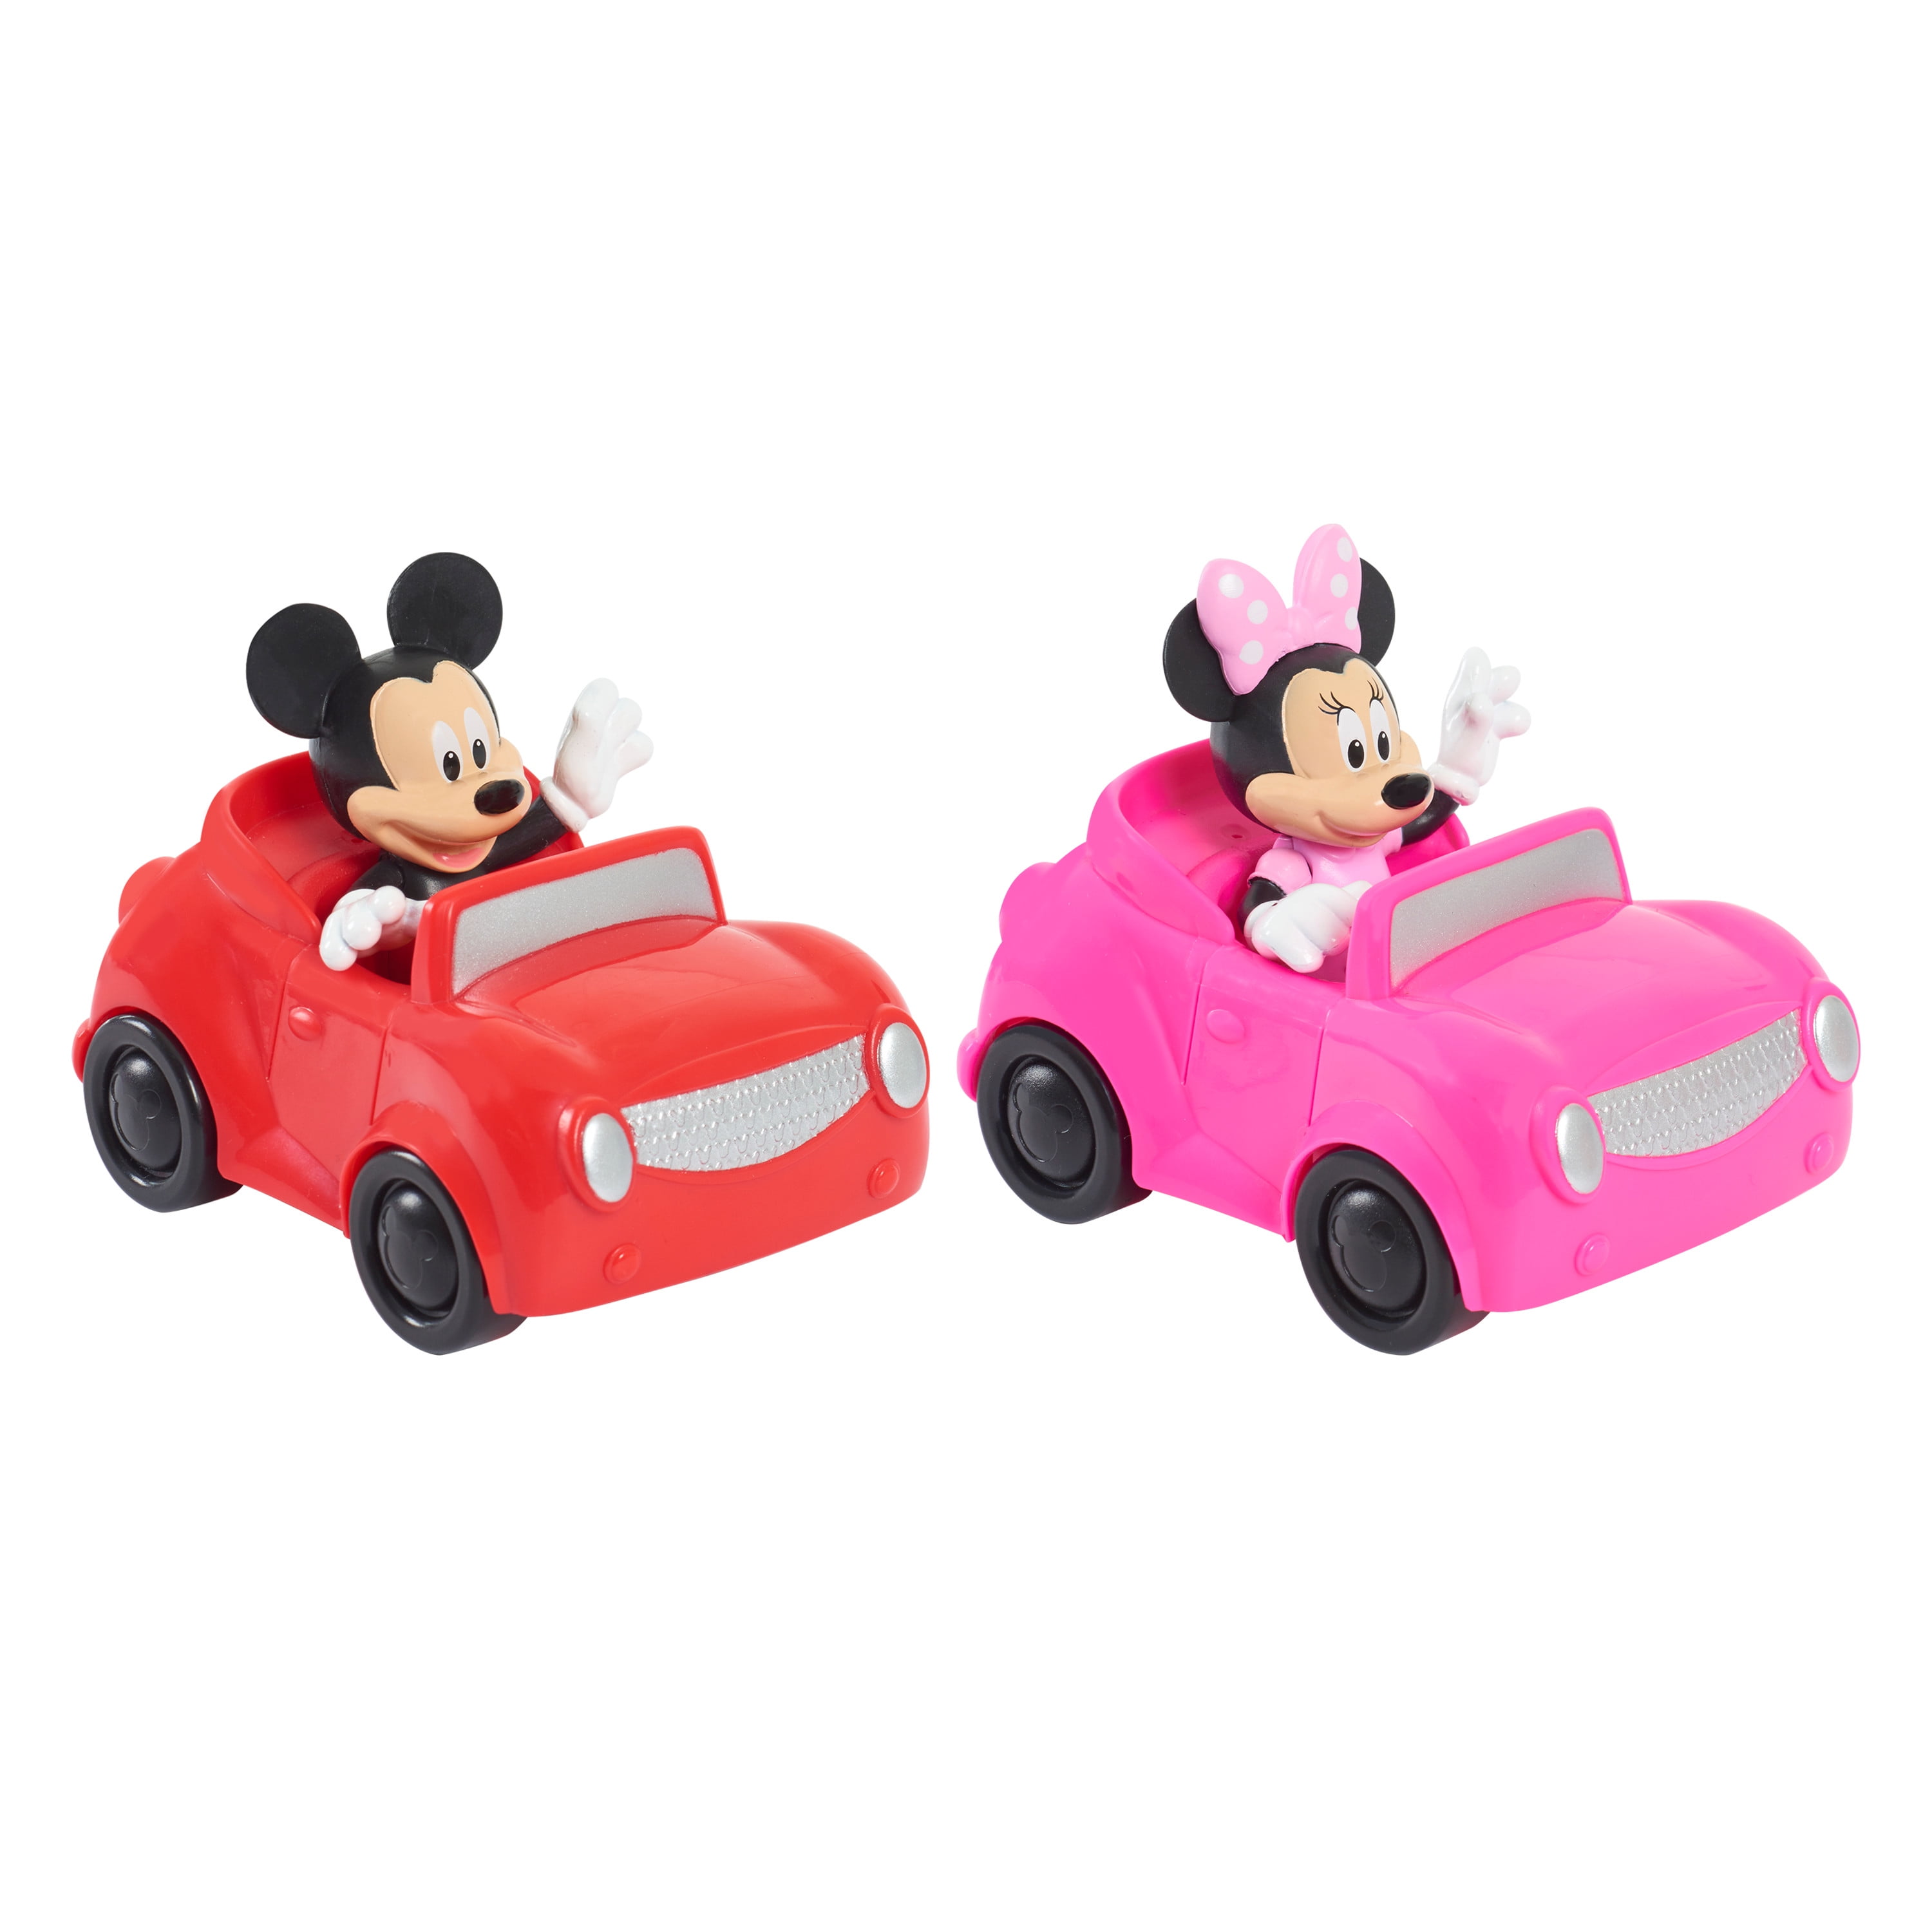 Disney Junior Mickey Mouse on The Move Vehicles 2-Pack Set, Mickey and Minnie  Mouse Articulated Figures and Cars, Officially Licensed Kids Toys for Ages  3 Up, Gifts and Presents 